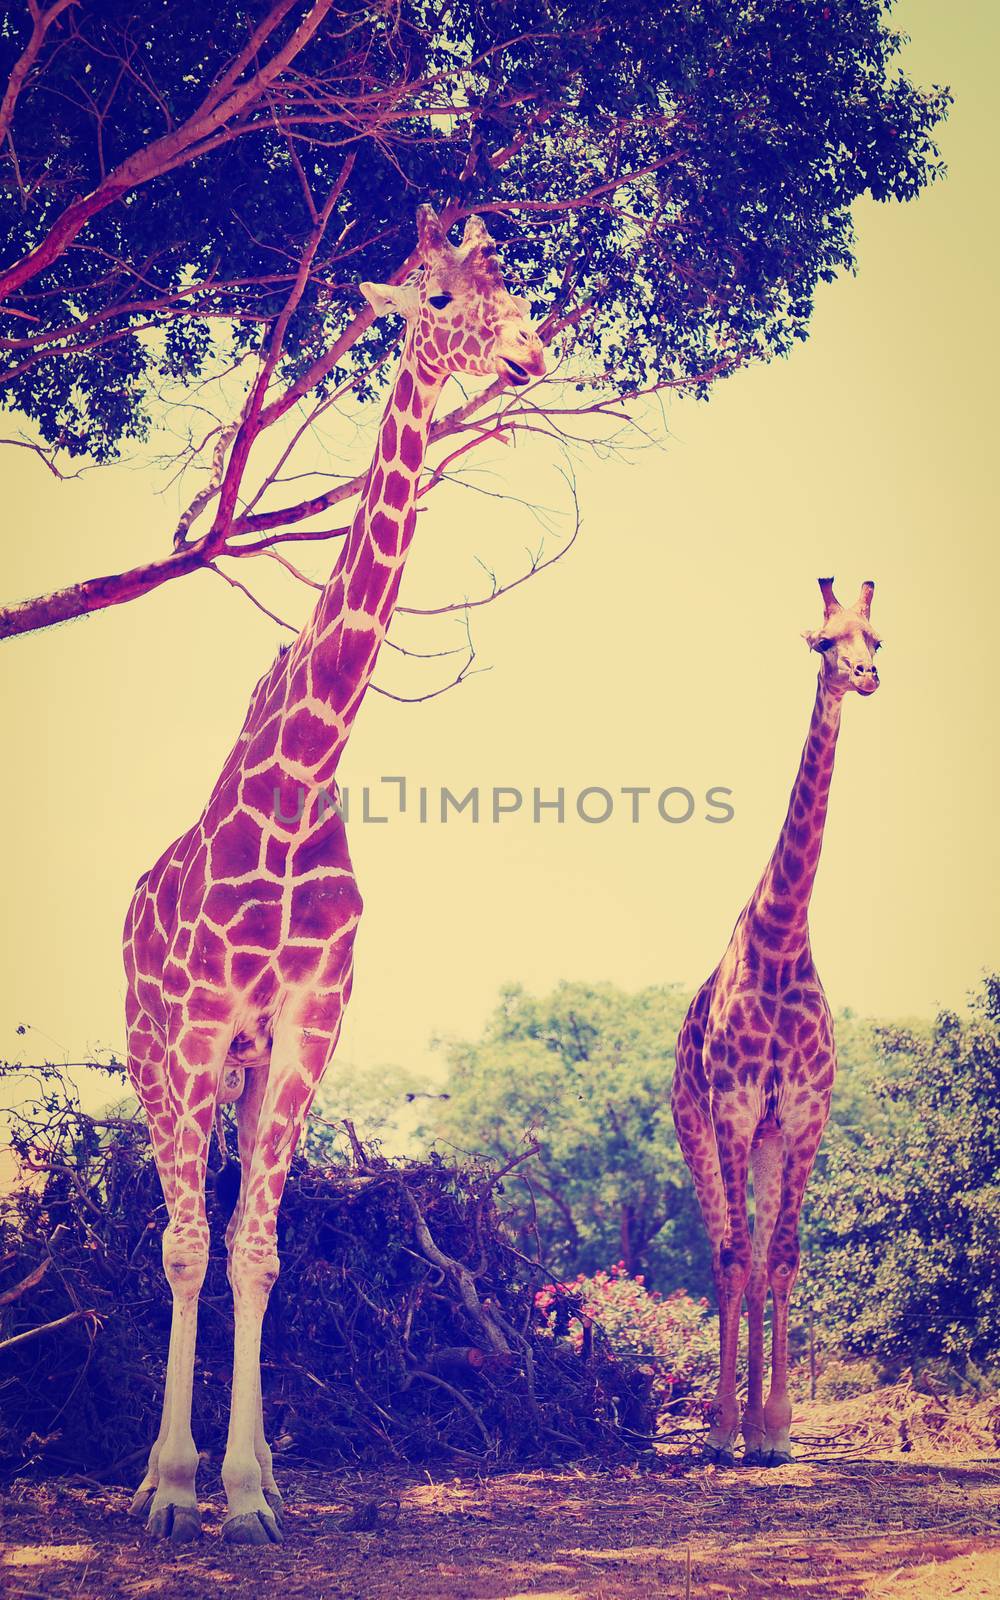 Two Reticulated Giraffes  Near the Tree, Instagram Effect